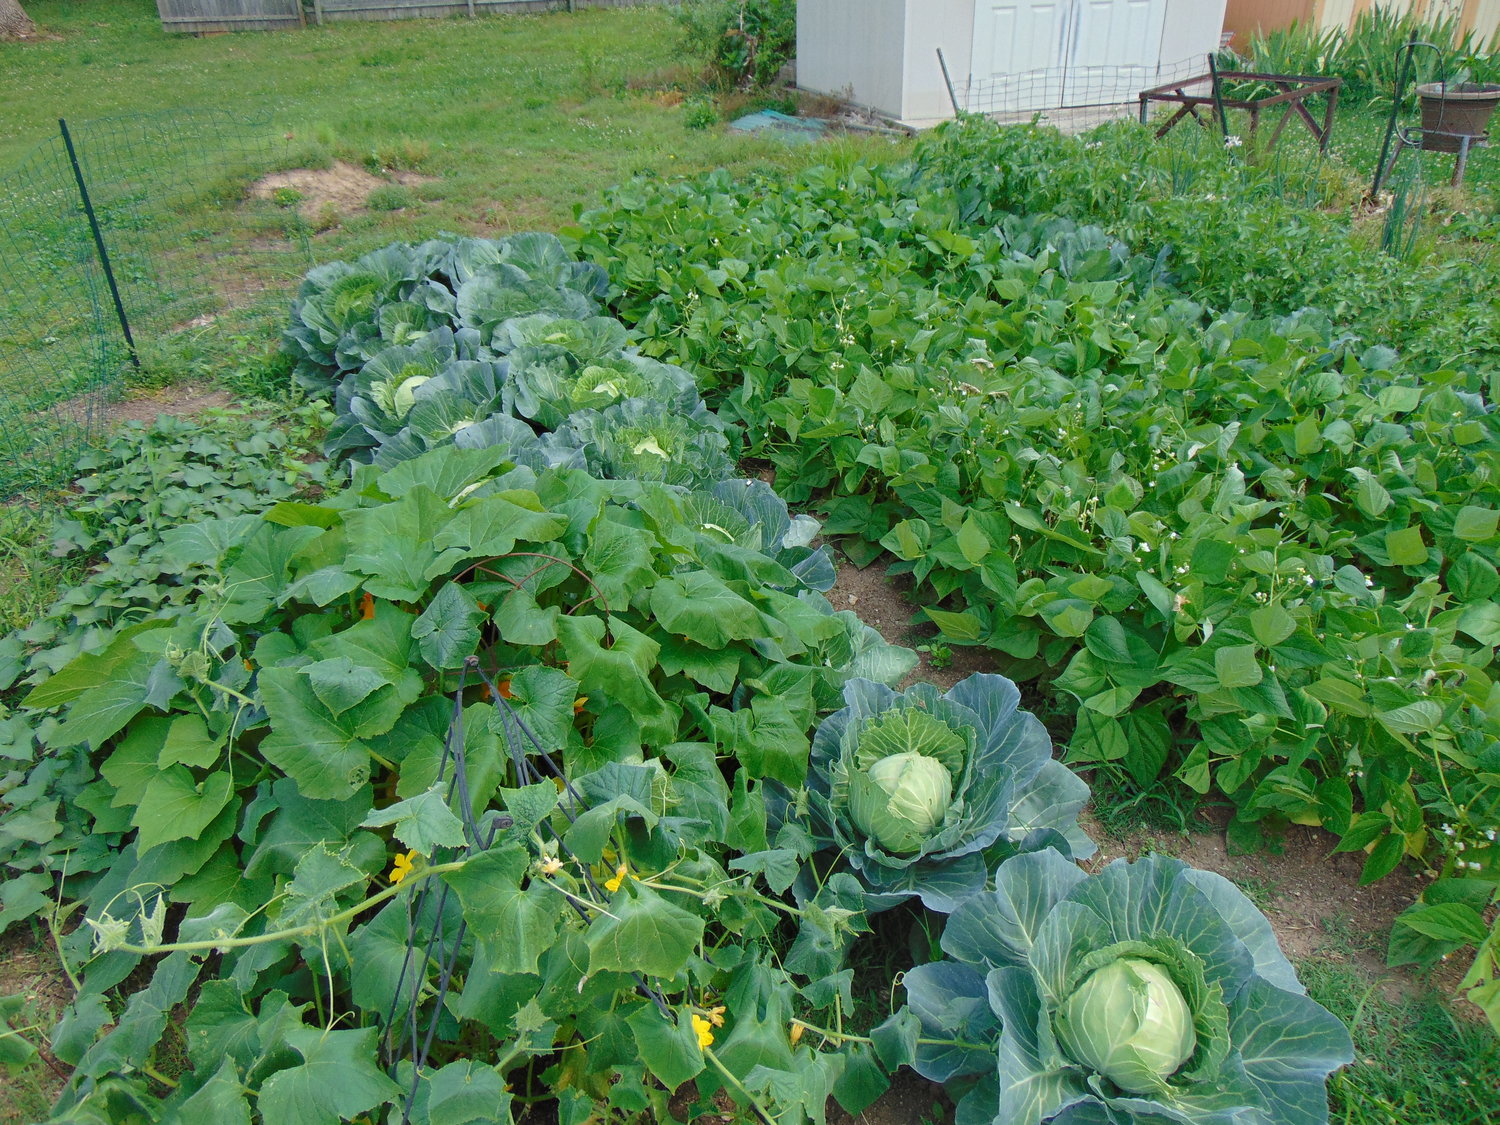 Big leafy cabbage plants are just about ready to pick.